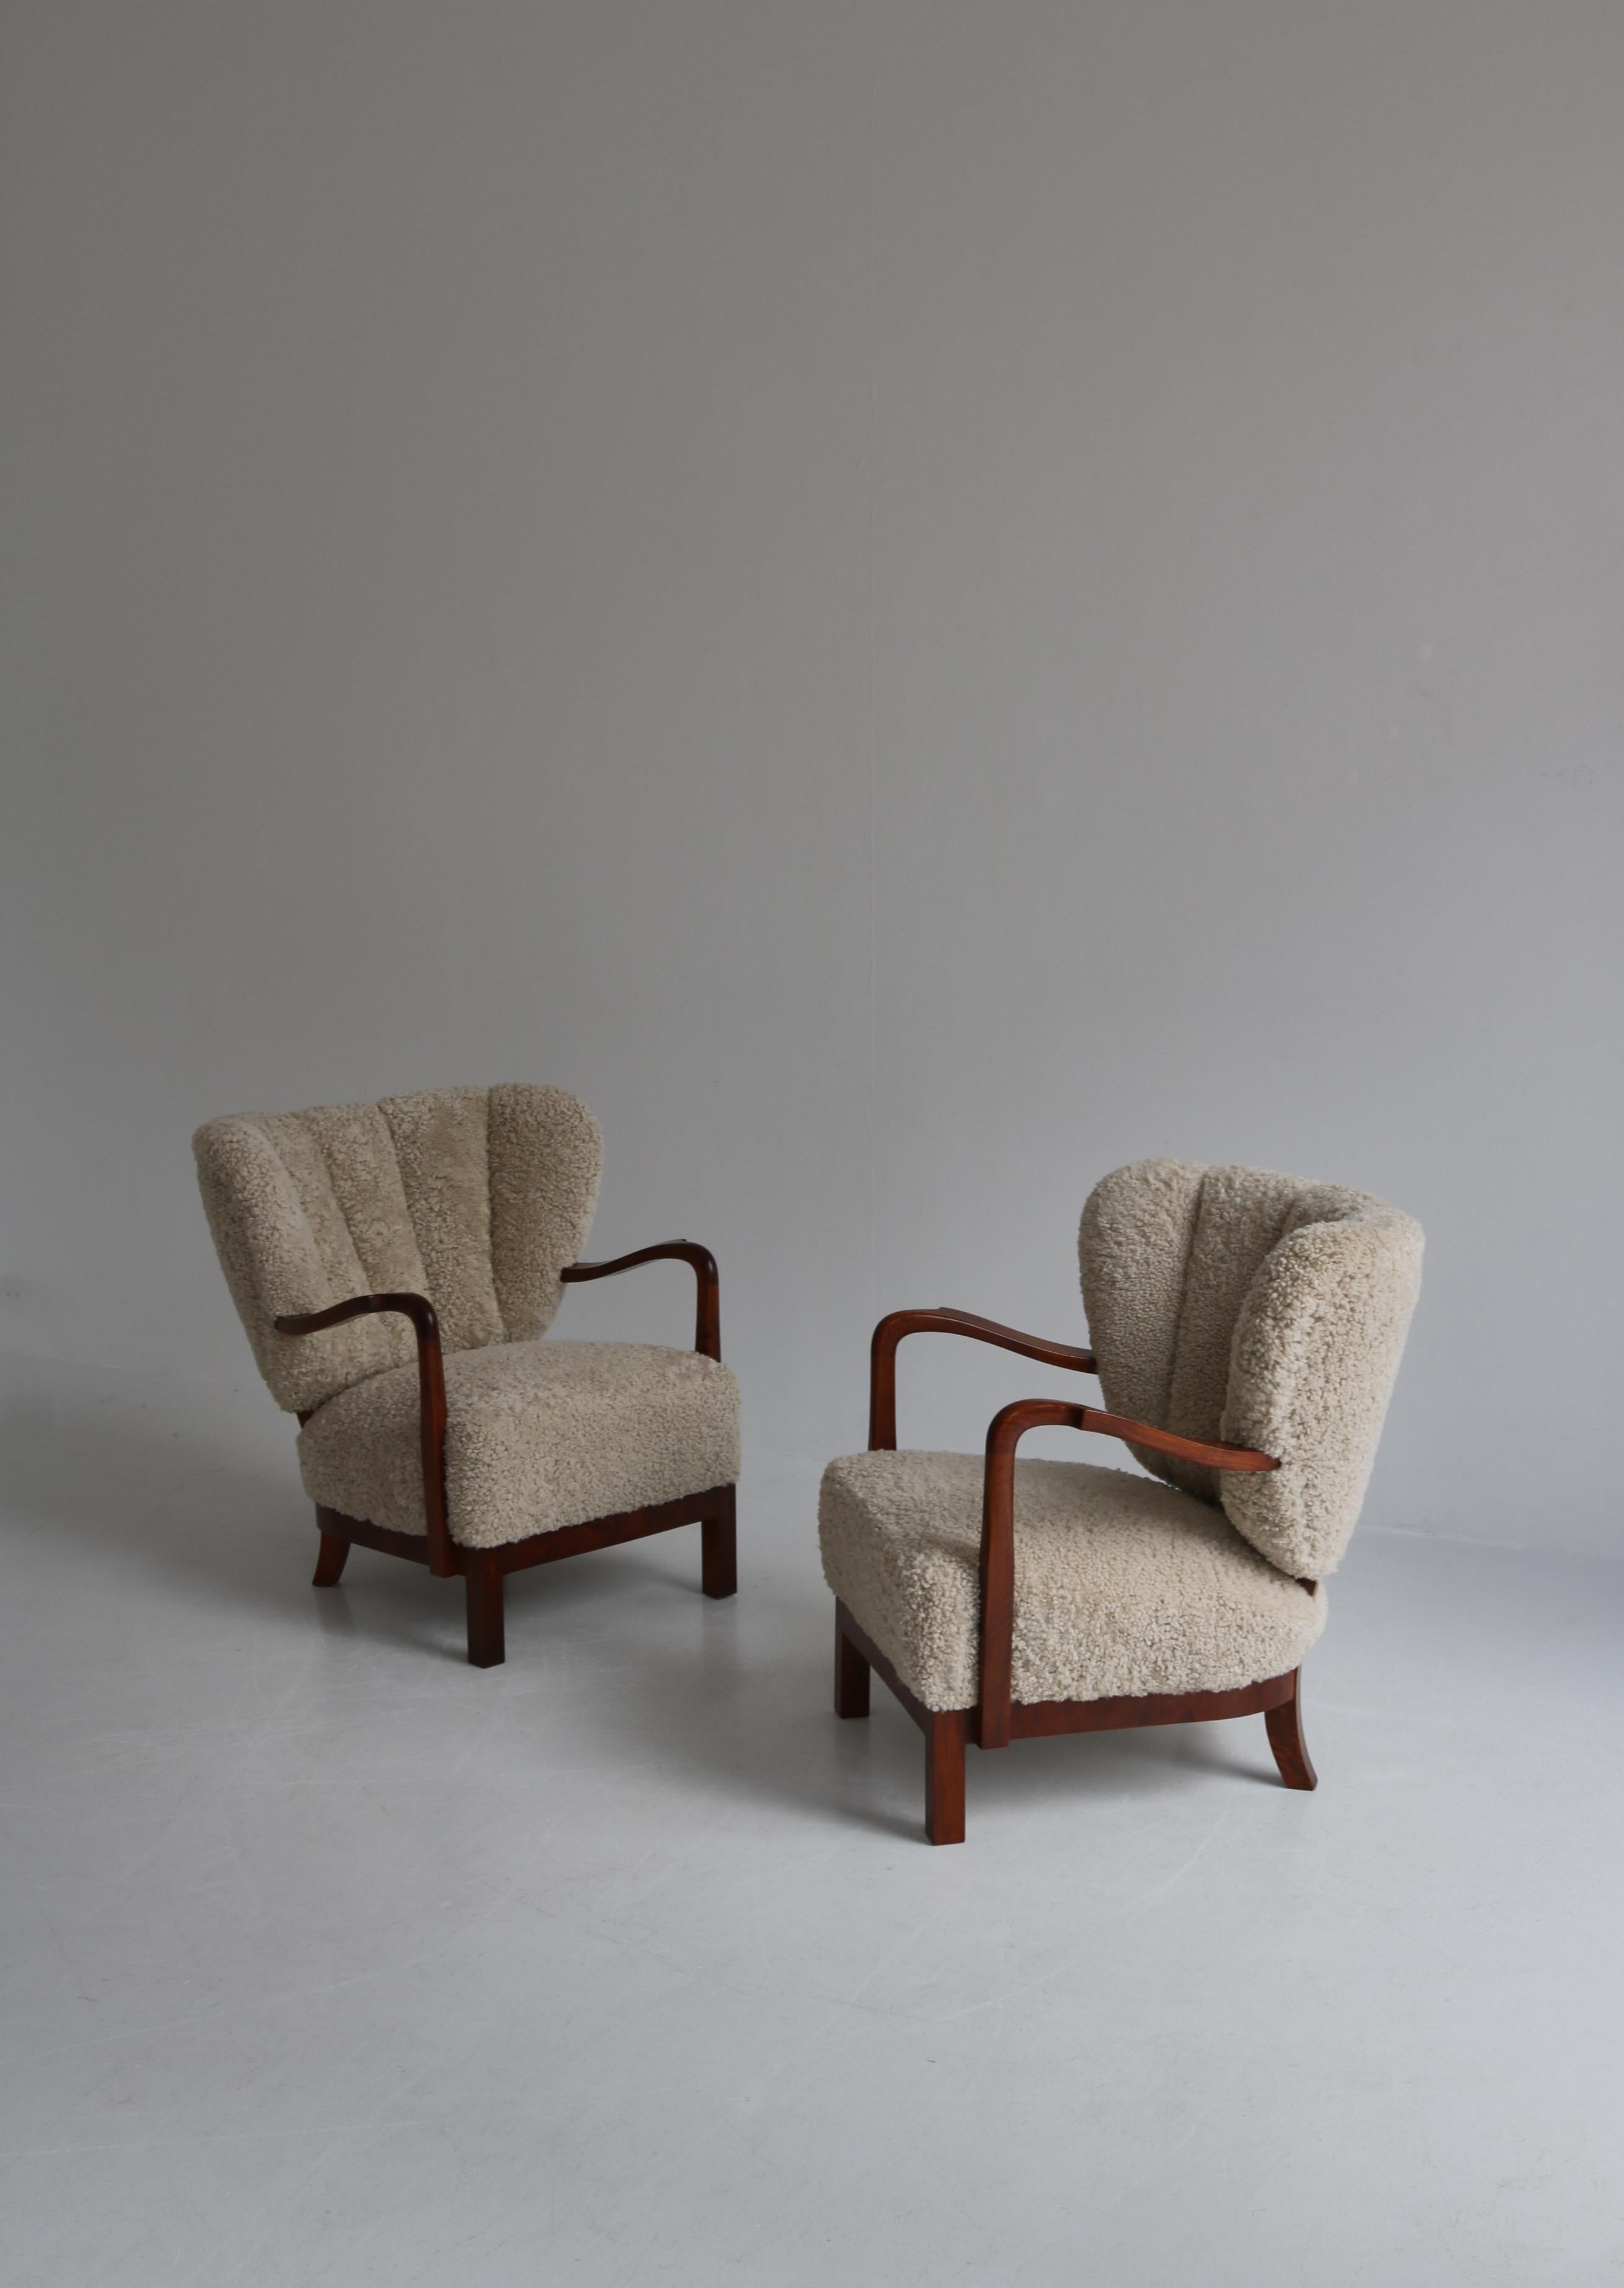 Viggo Boesen Lounge Chairs in Nutwood and Sheepskin, 1930s Danish Modern In Good Condition For Sale In Odense, DK